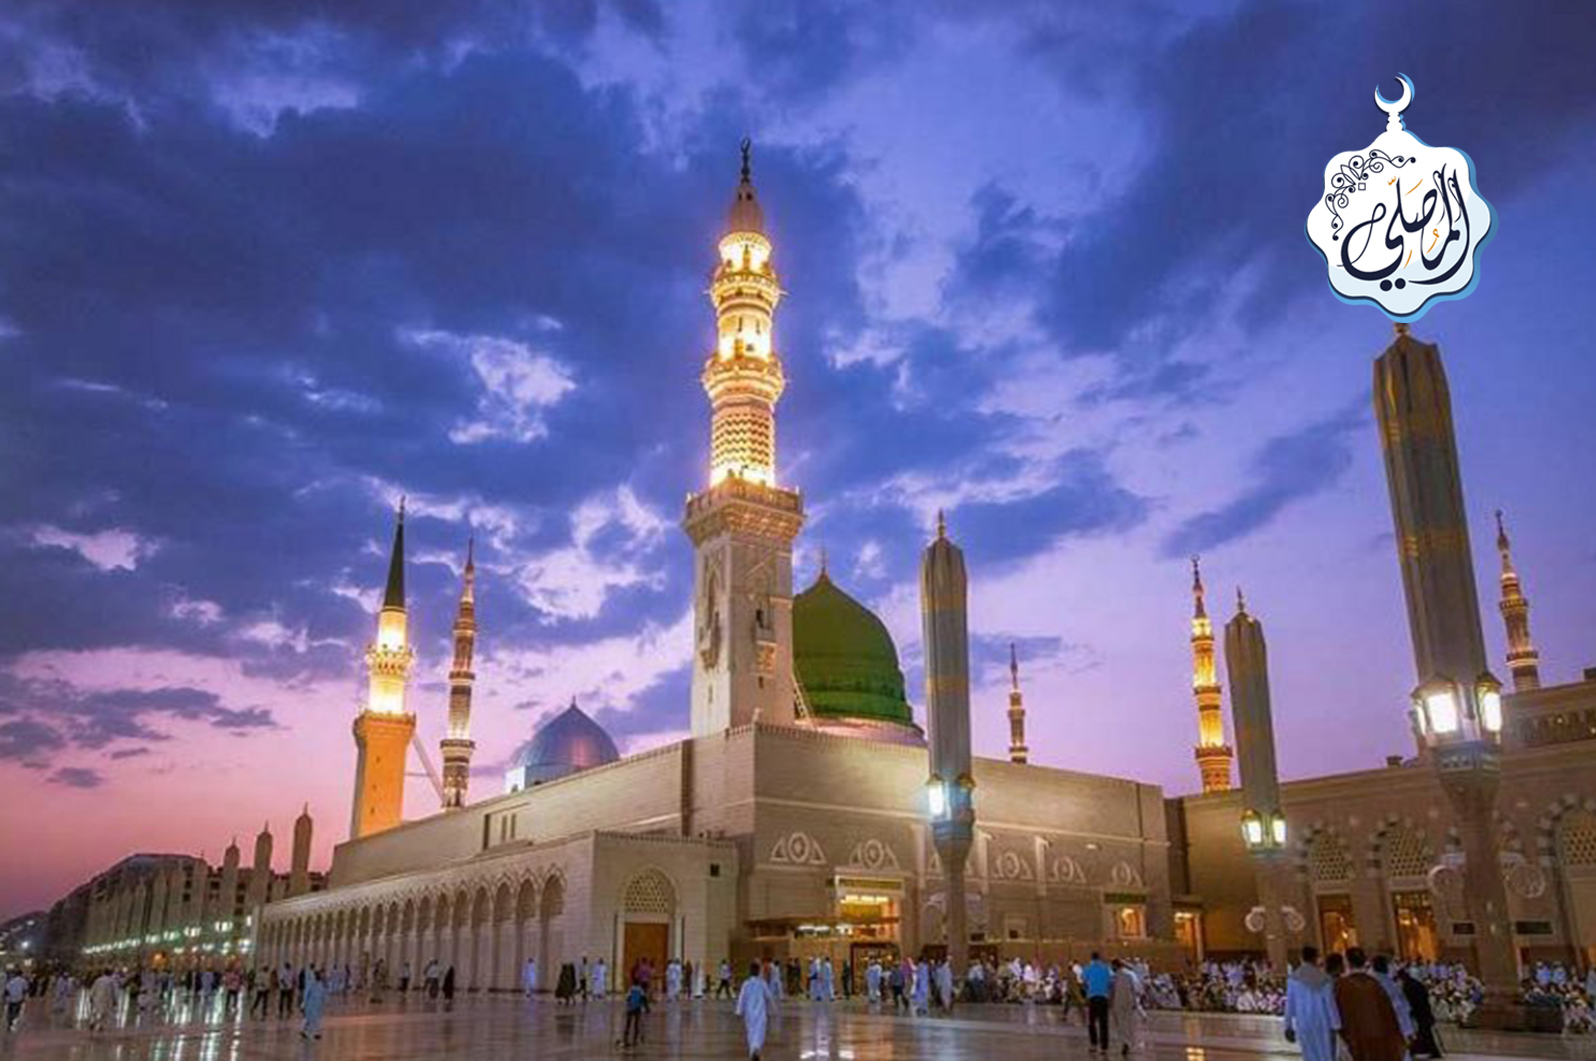 Three important life lessons to learn from the house of the prophet “pbuh”